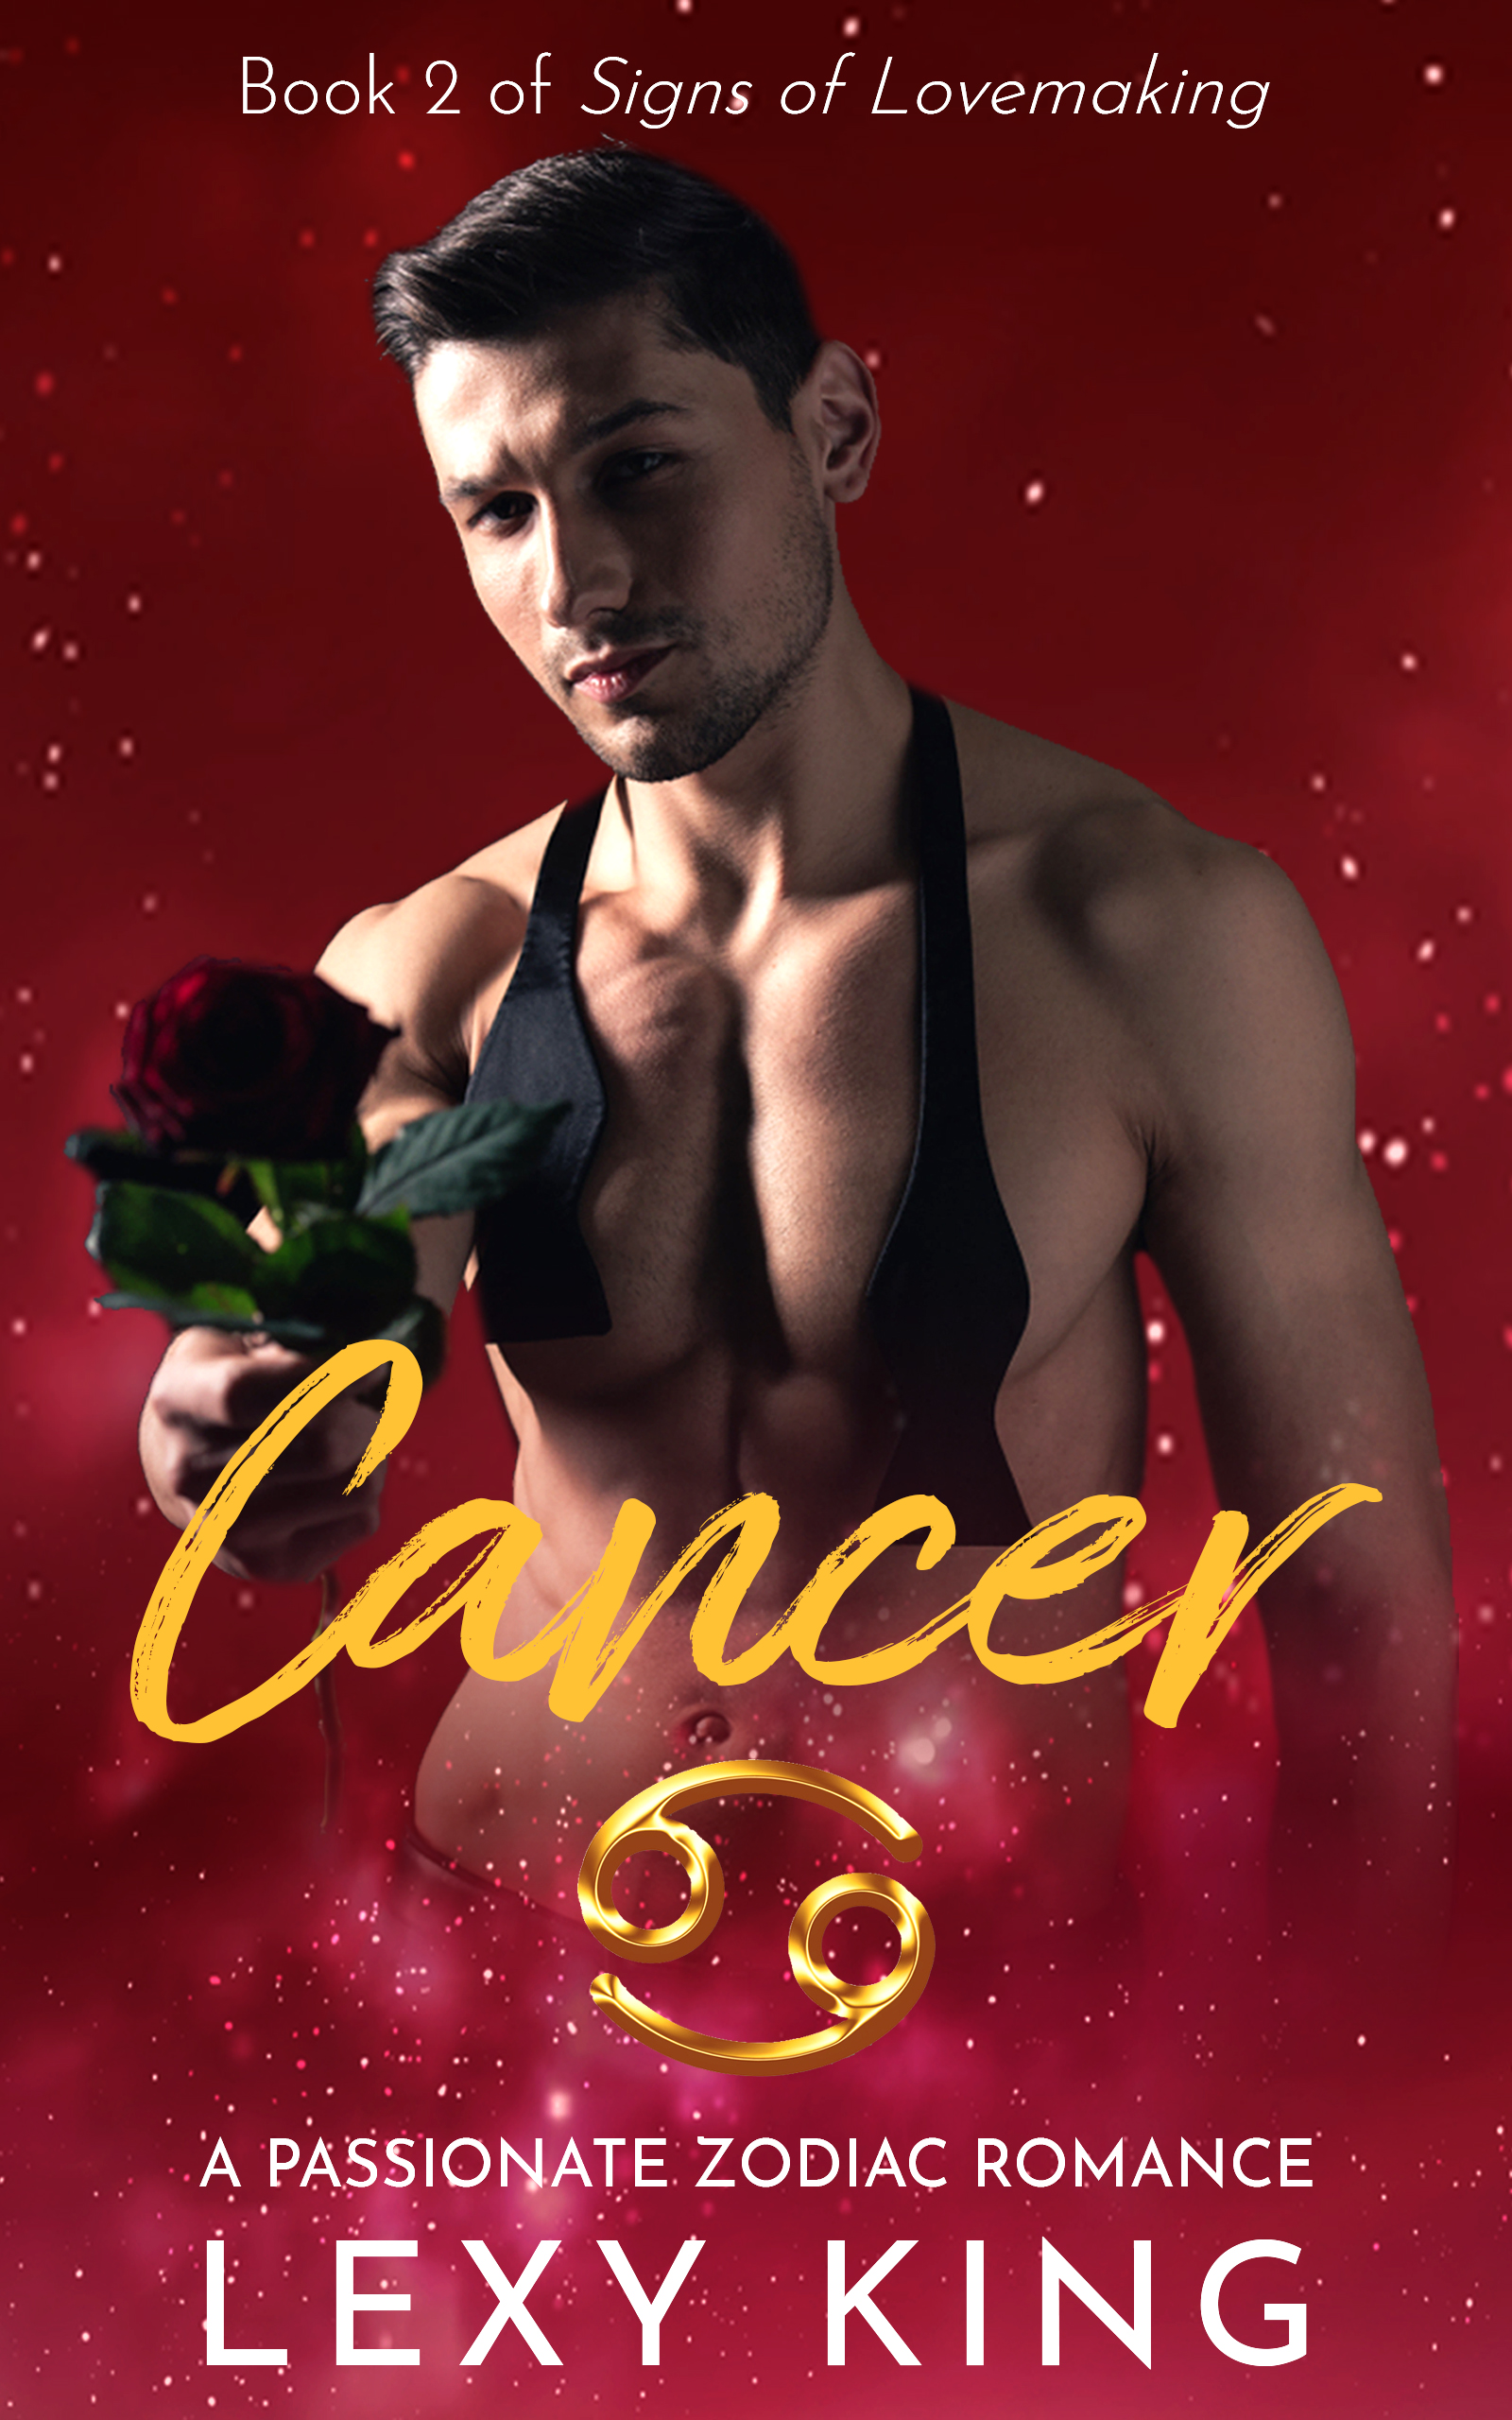 FREE: Cancer: A Passionate Zodiac Romance (Book 2 in Signs of Lovemaking) by Lexy King